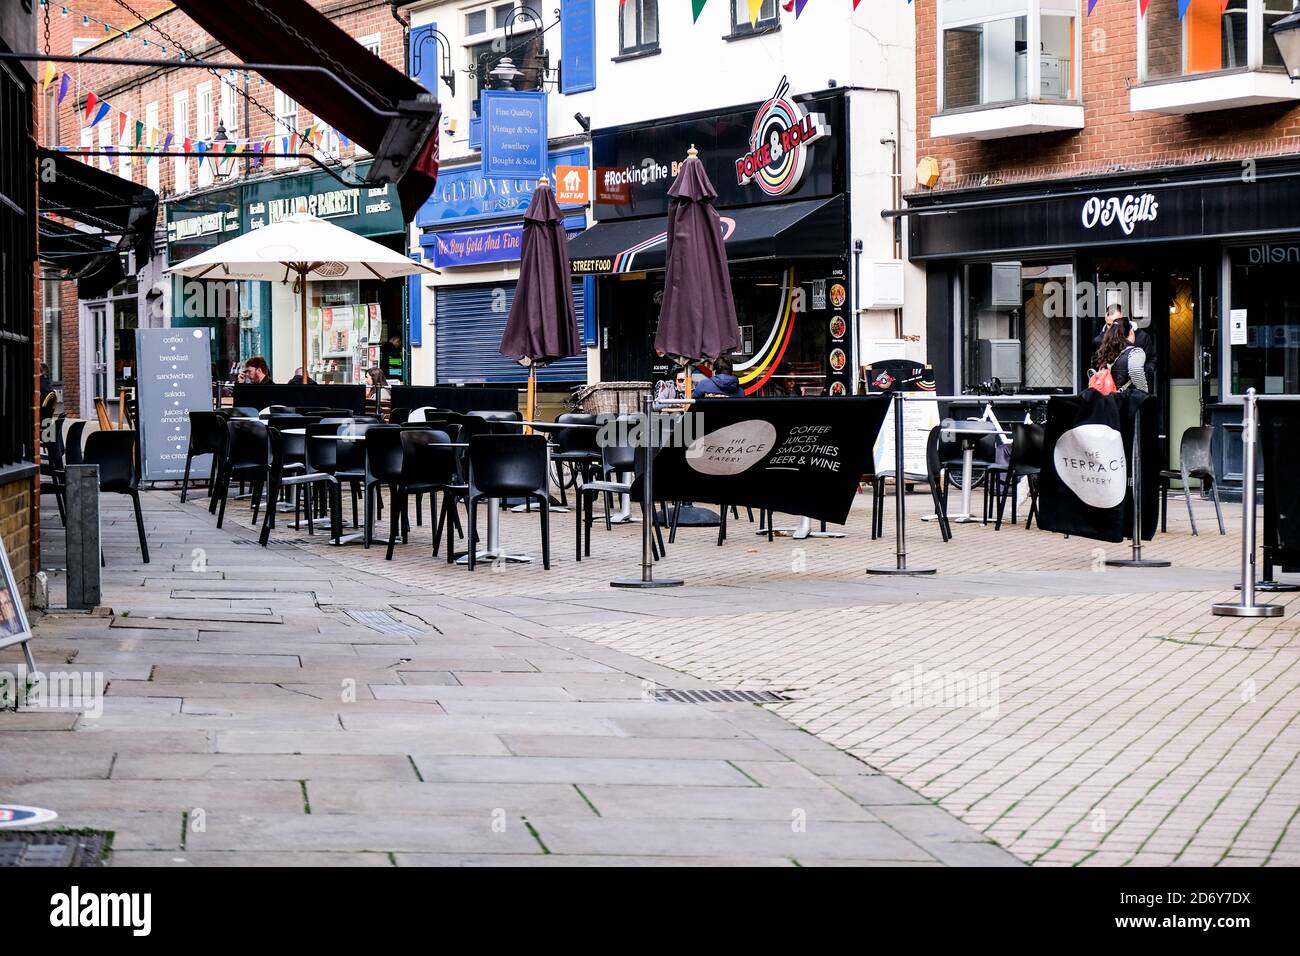 London UK October 19 2020, Empty Outside Cafe Or Restaurant Seating Areas During Covid-19 Goverment Lockdown Guidance Stock Photo